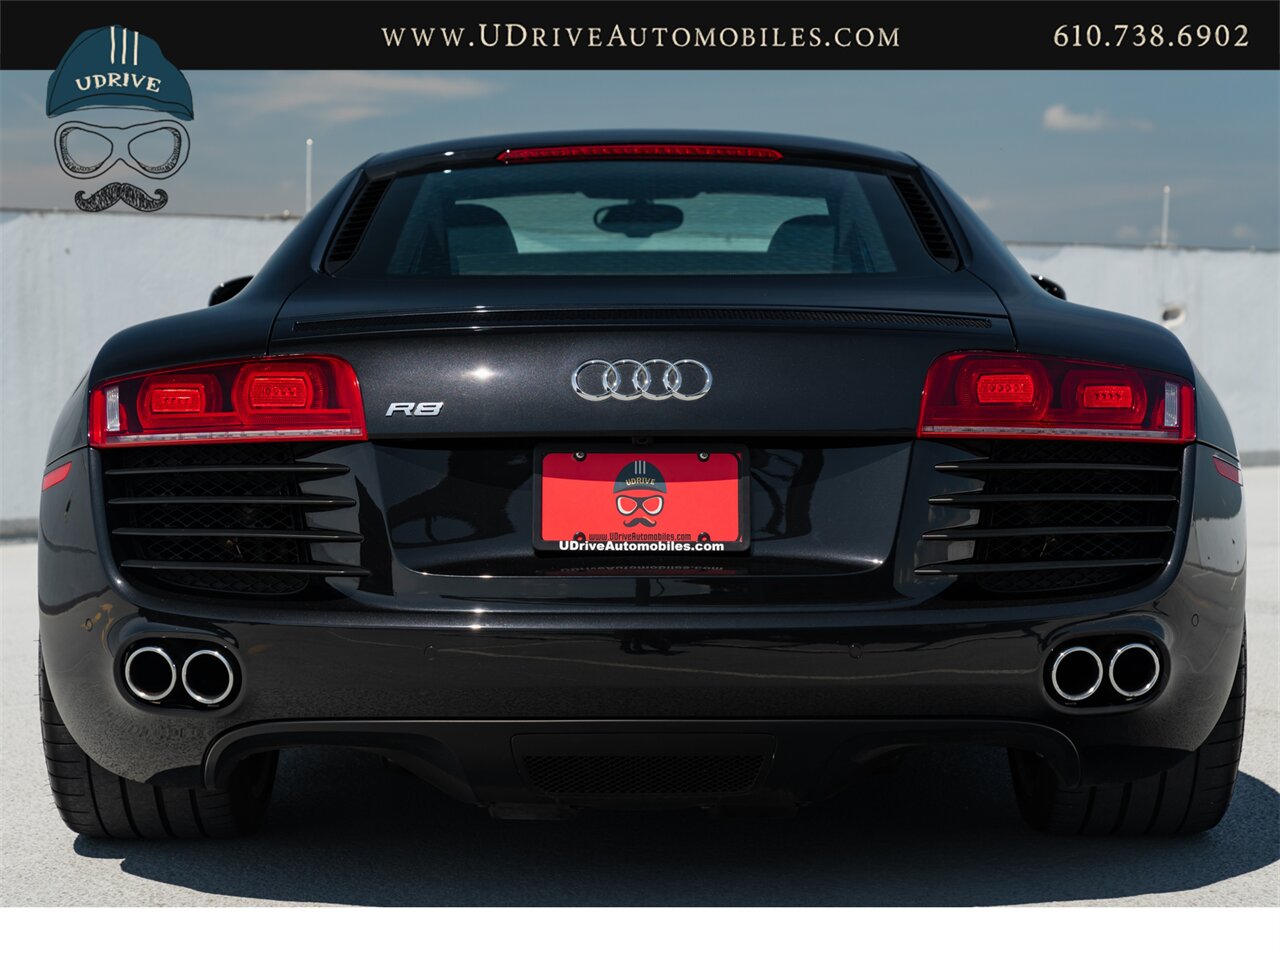 2012 Audi R8 4.2 Quattro  6 Speed Manual 1 Owner Service History - Photo 21 - West Chester, PA 19382